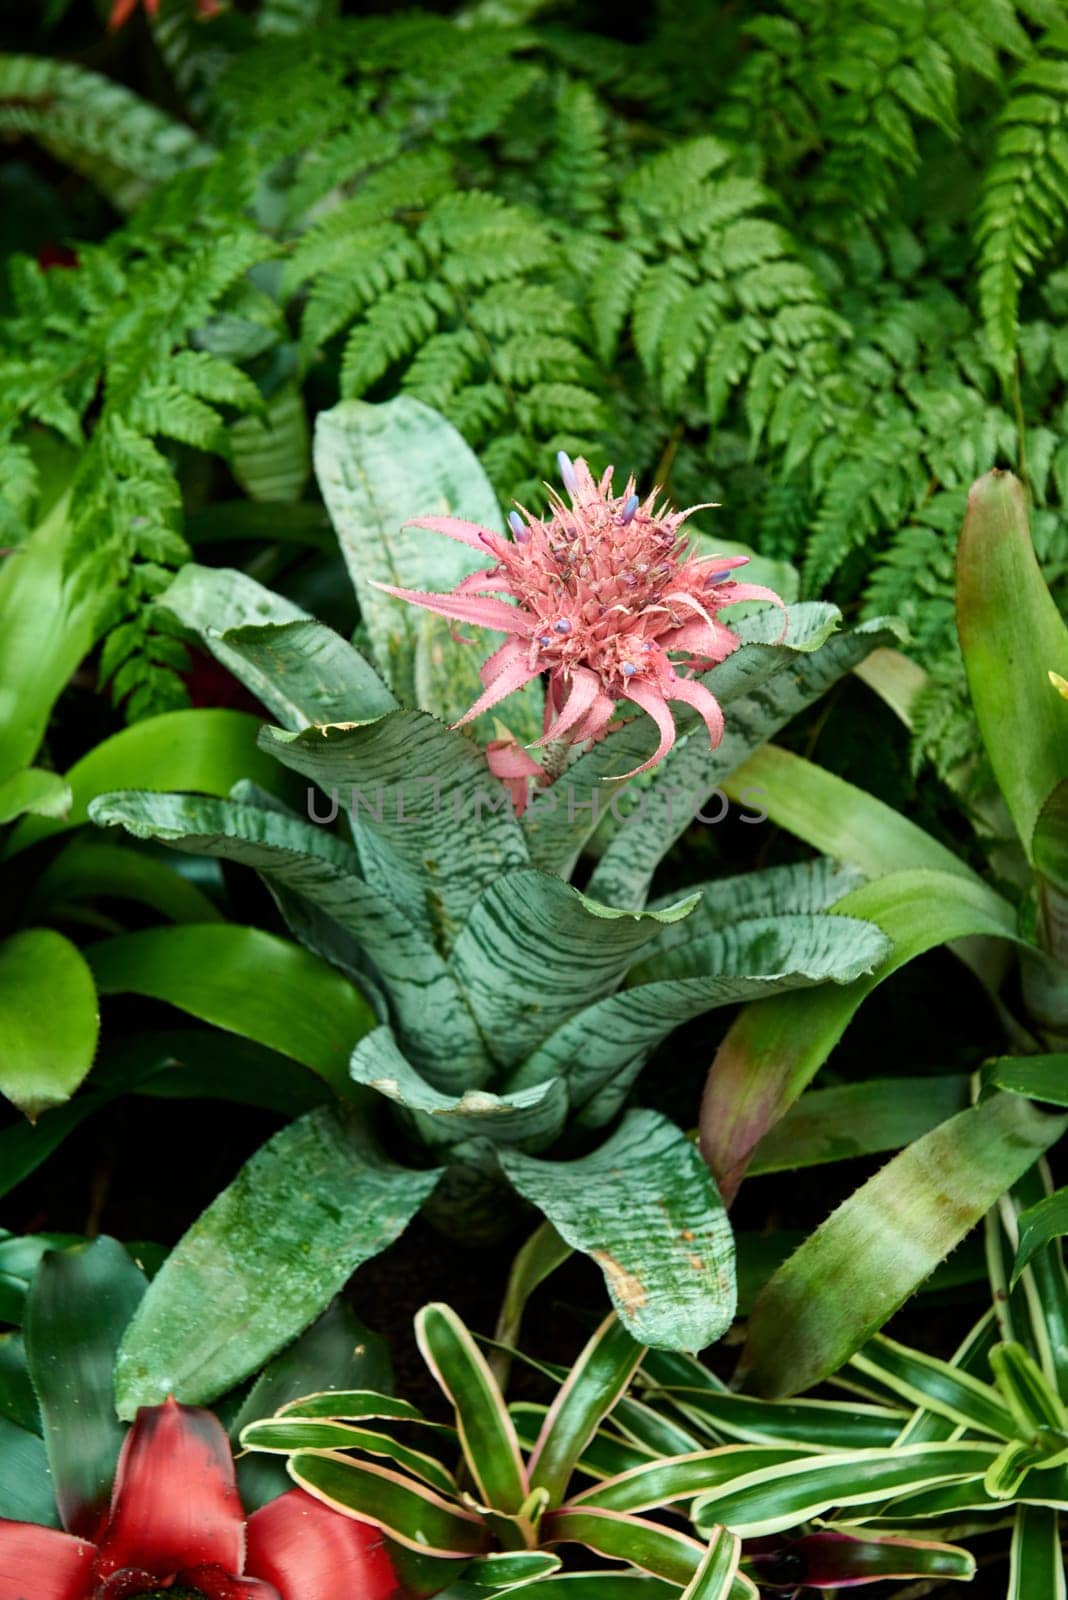 Aechmea Elegance: Discovering the Beauty of Bromeliads. Aechmea, bromeliad, plant, tropical, foliage, flower, exotic, ornamental, garden, indoor, houseplant, colorful, bloom, nature, green, leaves, vibrant, botany, botanical, tropical plant, flowering, horticulture, gardening, tropical garden, indoor decor, tropical flower, tropical foliage plant